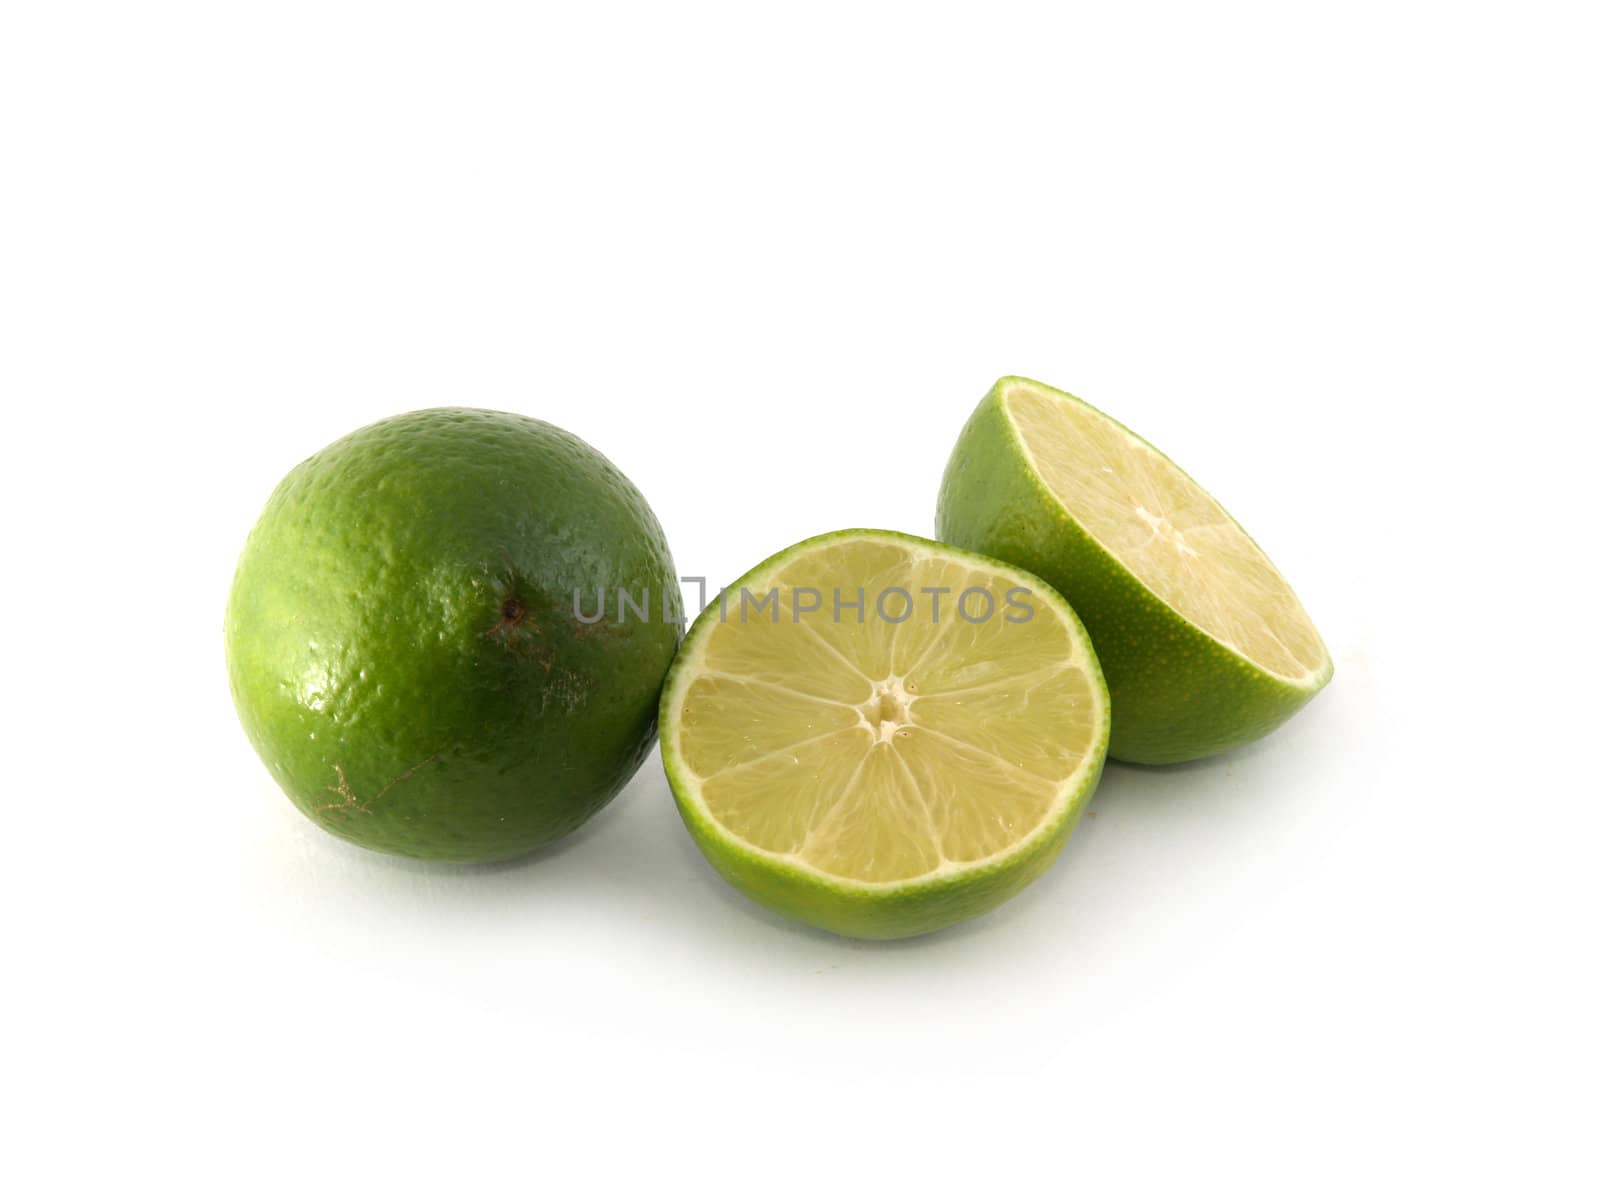 One green lime and two halves liyng on the white background